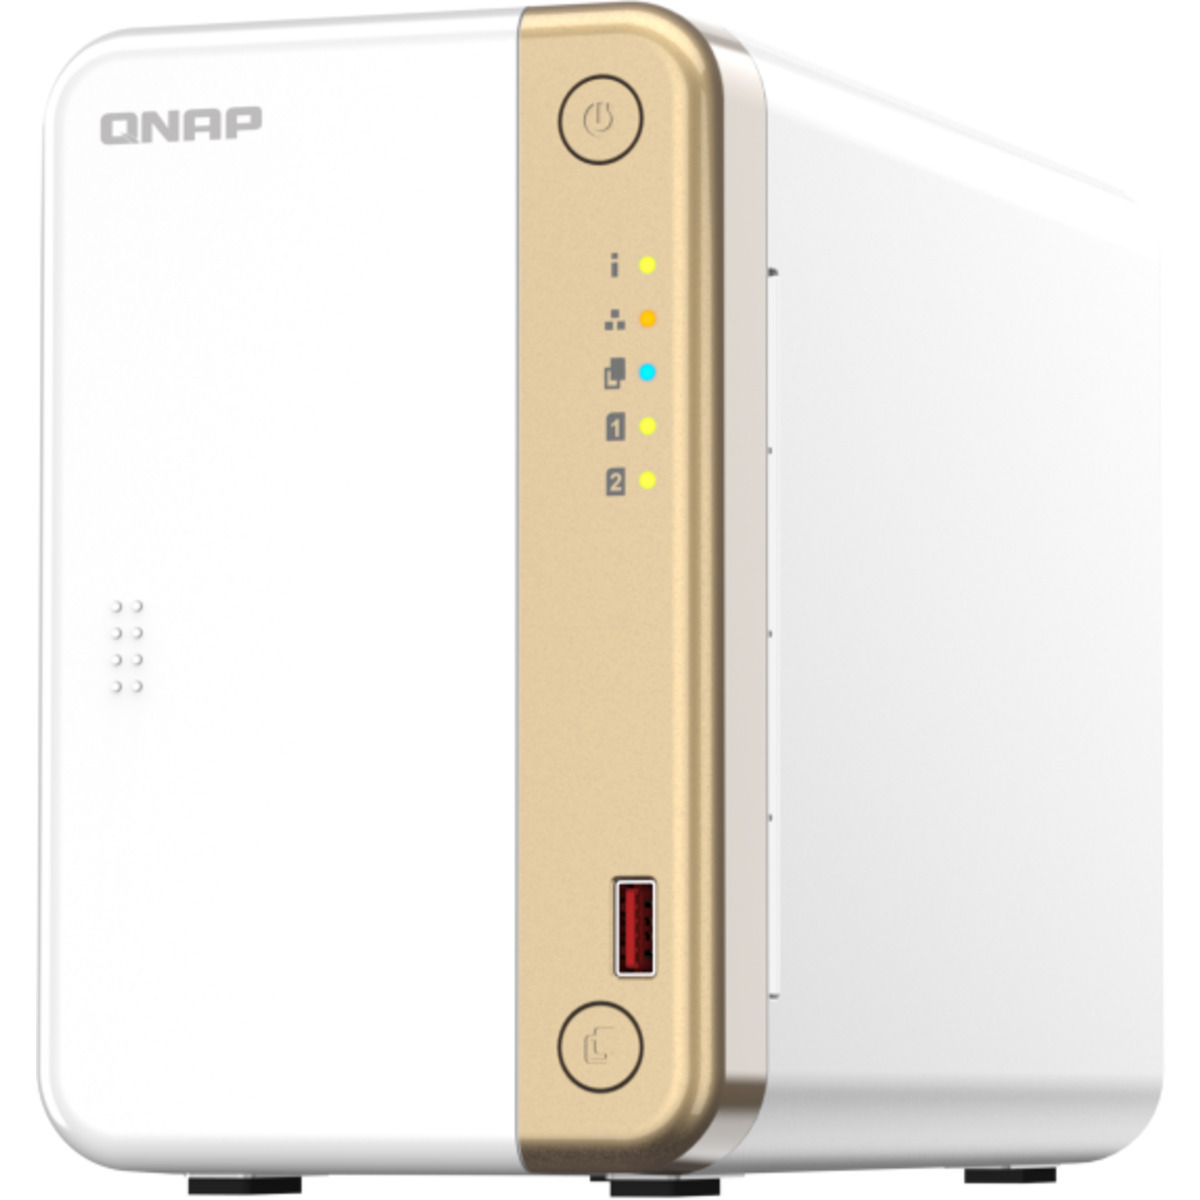 QNAP TS-262 18tb 2-Bay Desktop Personal / Basic Home / Small Office NAS - Network Attached Storage Device 1x18tb Toshiba Enterprise Capacity MG09ACA18TE 3.5 7200rpm SATA 6Gb/s HDD ENTERPRISE Class Drives Installed - Burn-In Tested TS-262